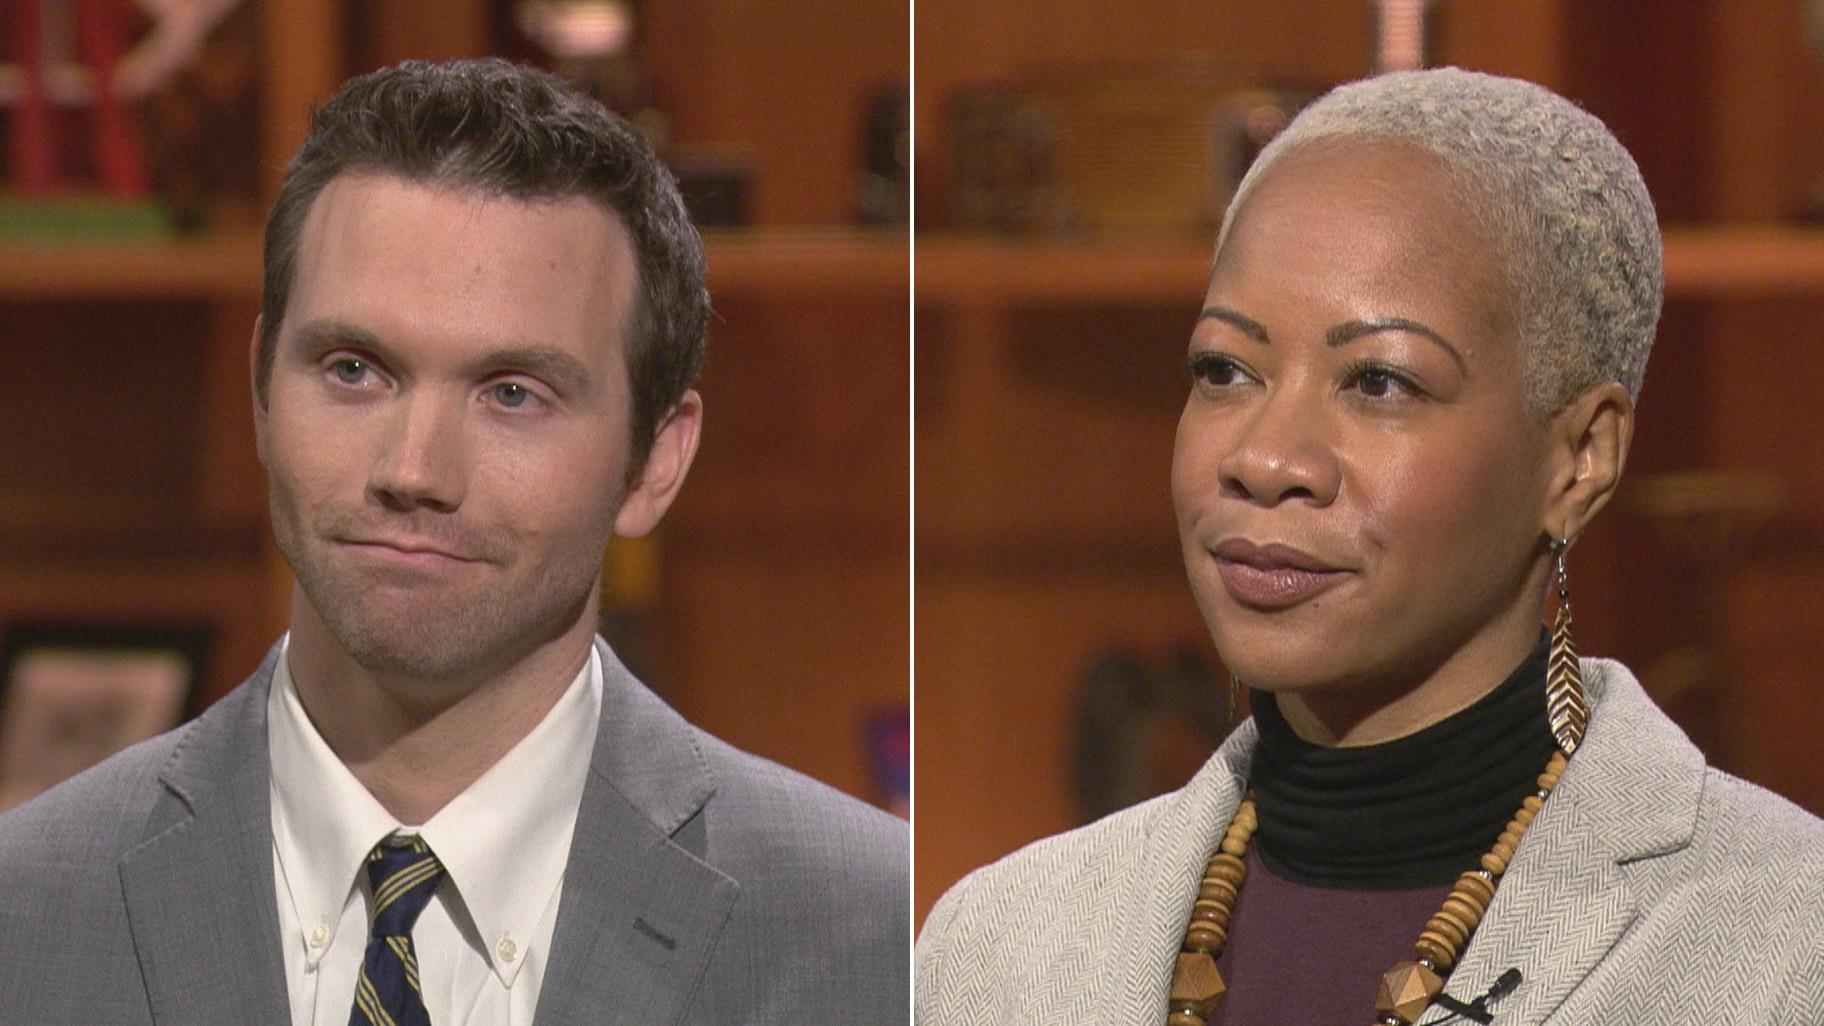 Former Lincoln Park High School interim Principal John Thuet and the former assistant Principal Michelle Brumfield appear on “Chicago Tonight” on Feb. 27, 2020. (WTTW News)